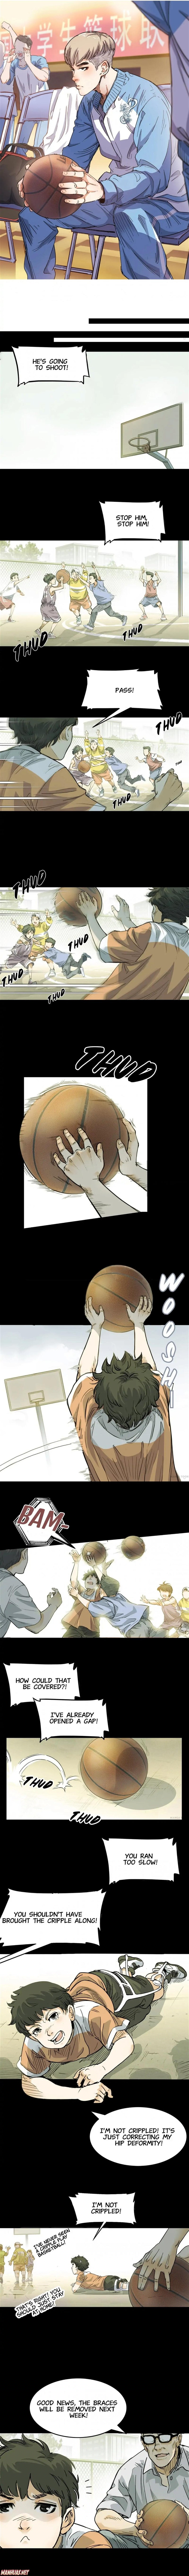 Streetball in the Hood Chapter 3 - Page 0